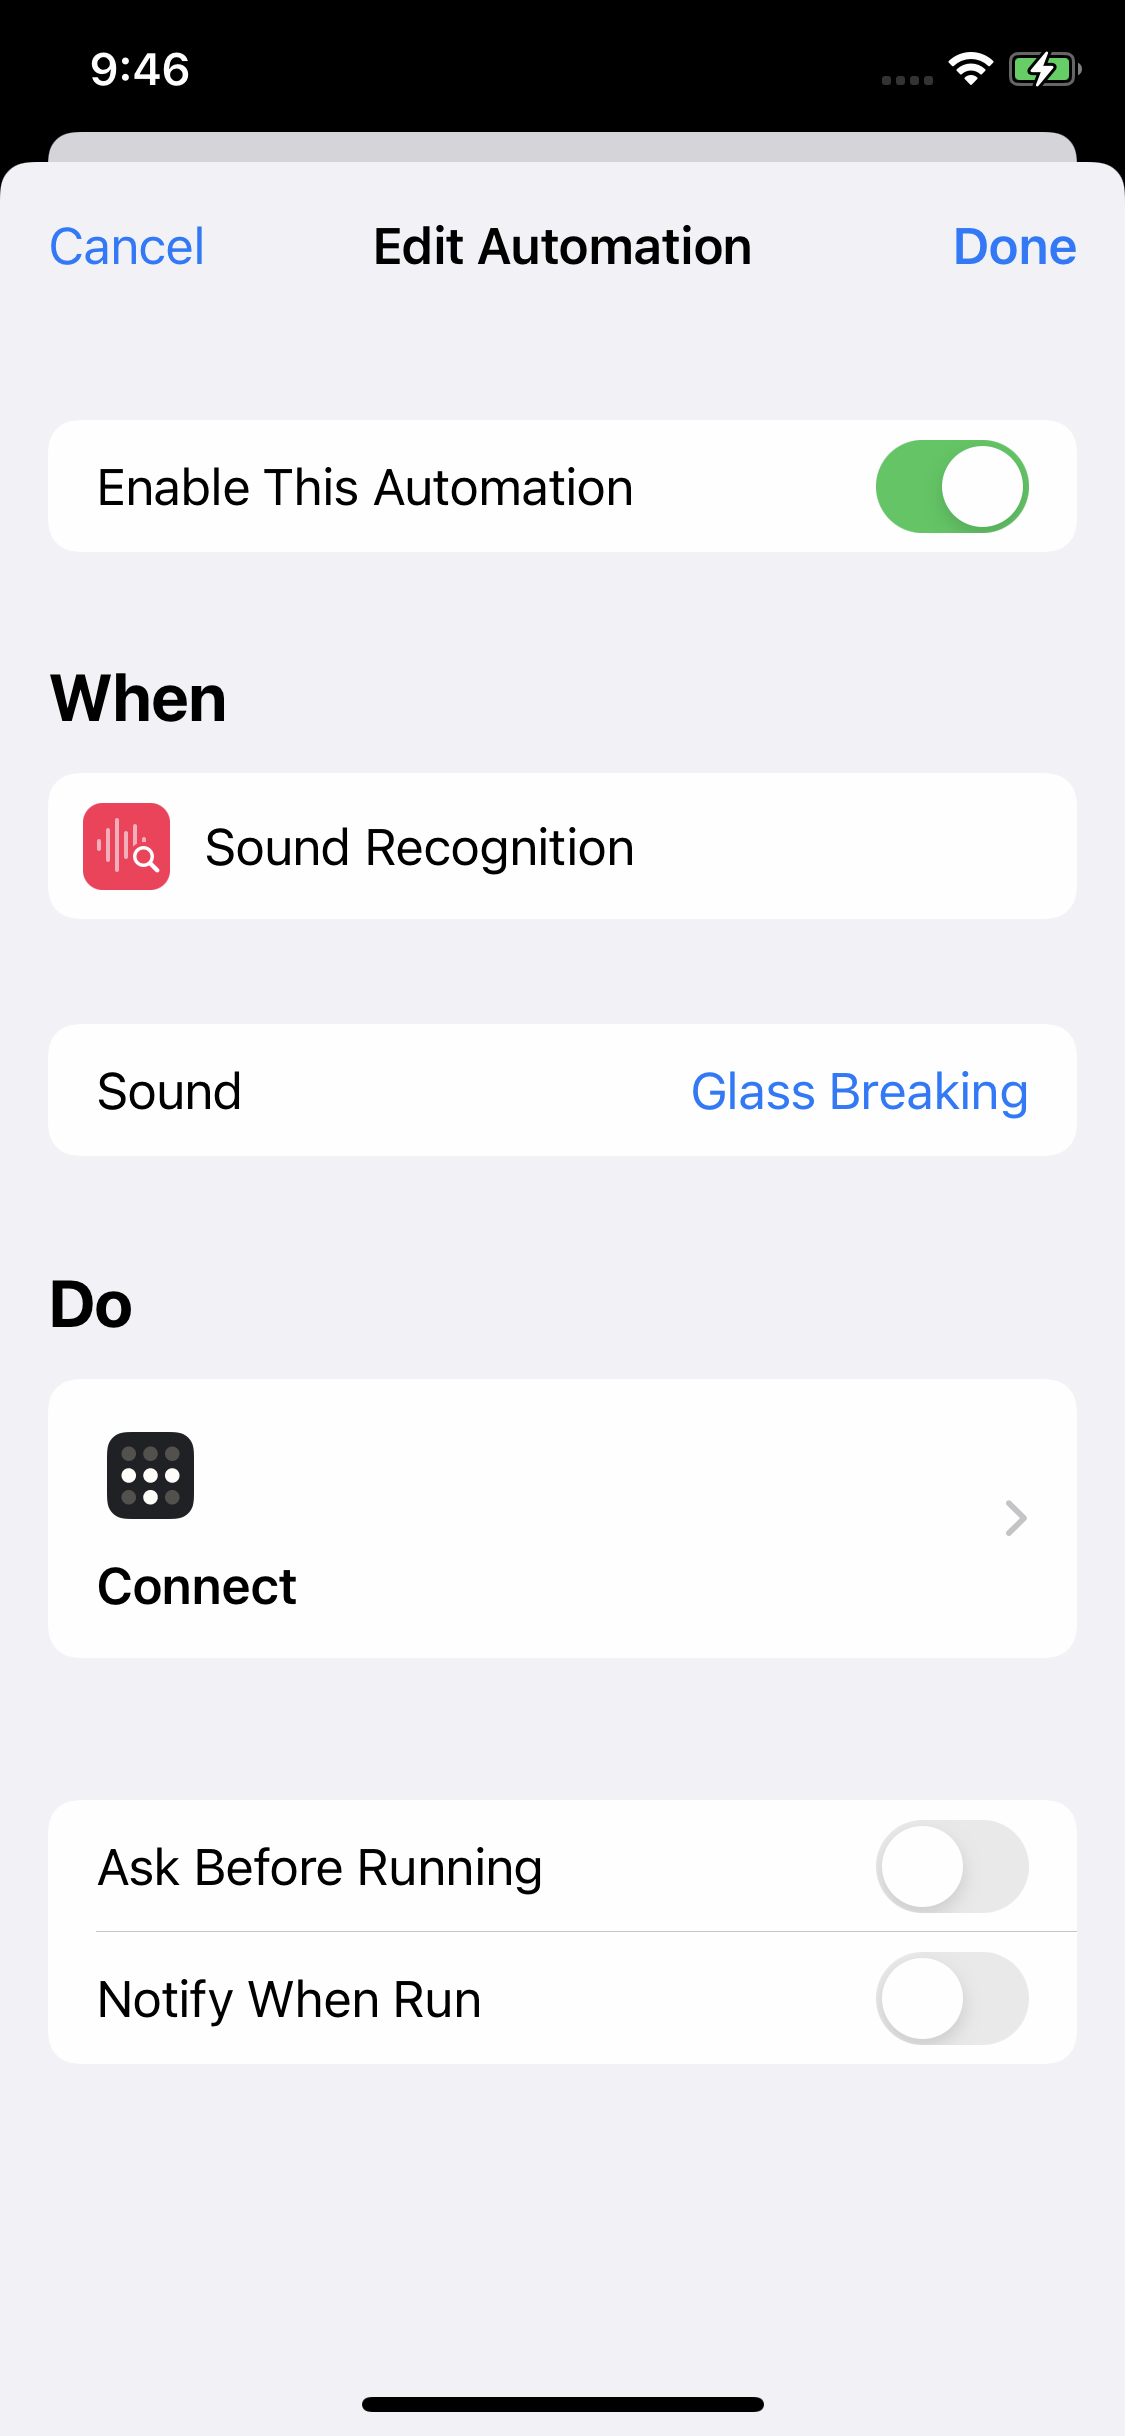 iOS Shortcuts automation that connects Tailscale when the sound of breaking glass is detected